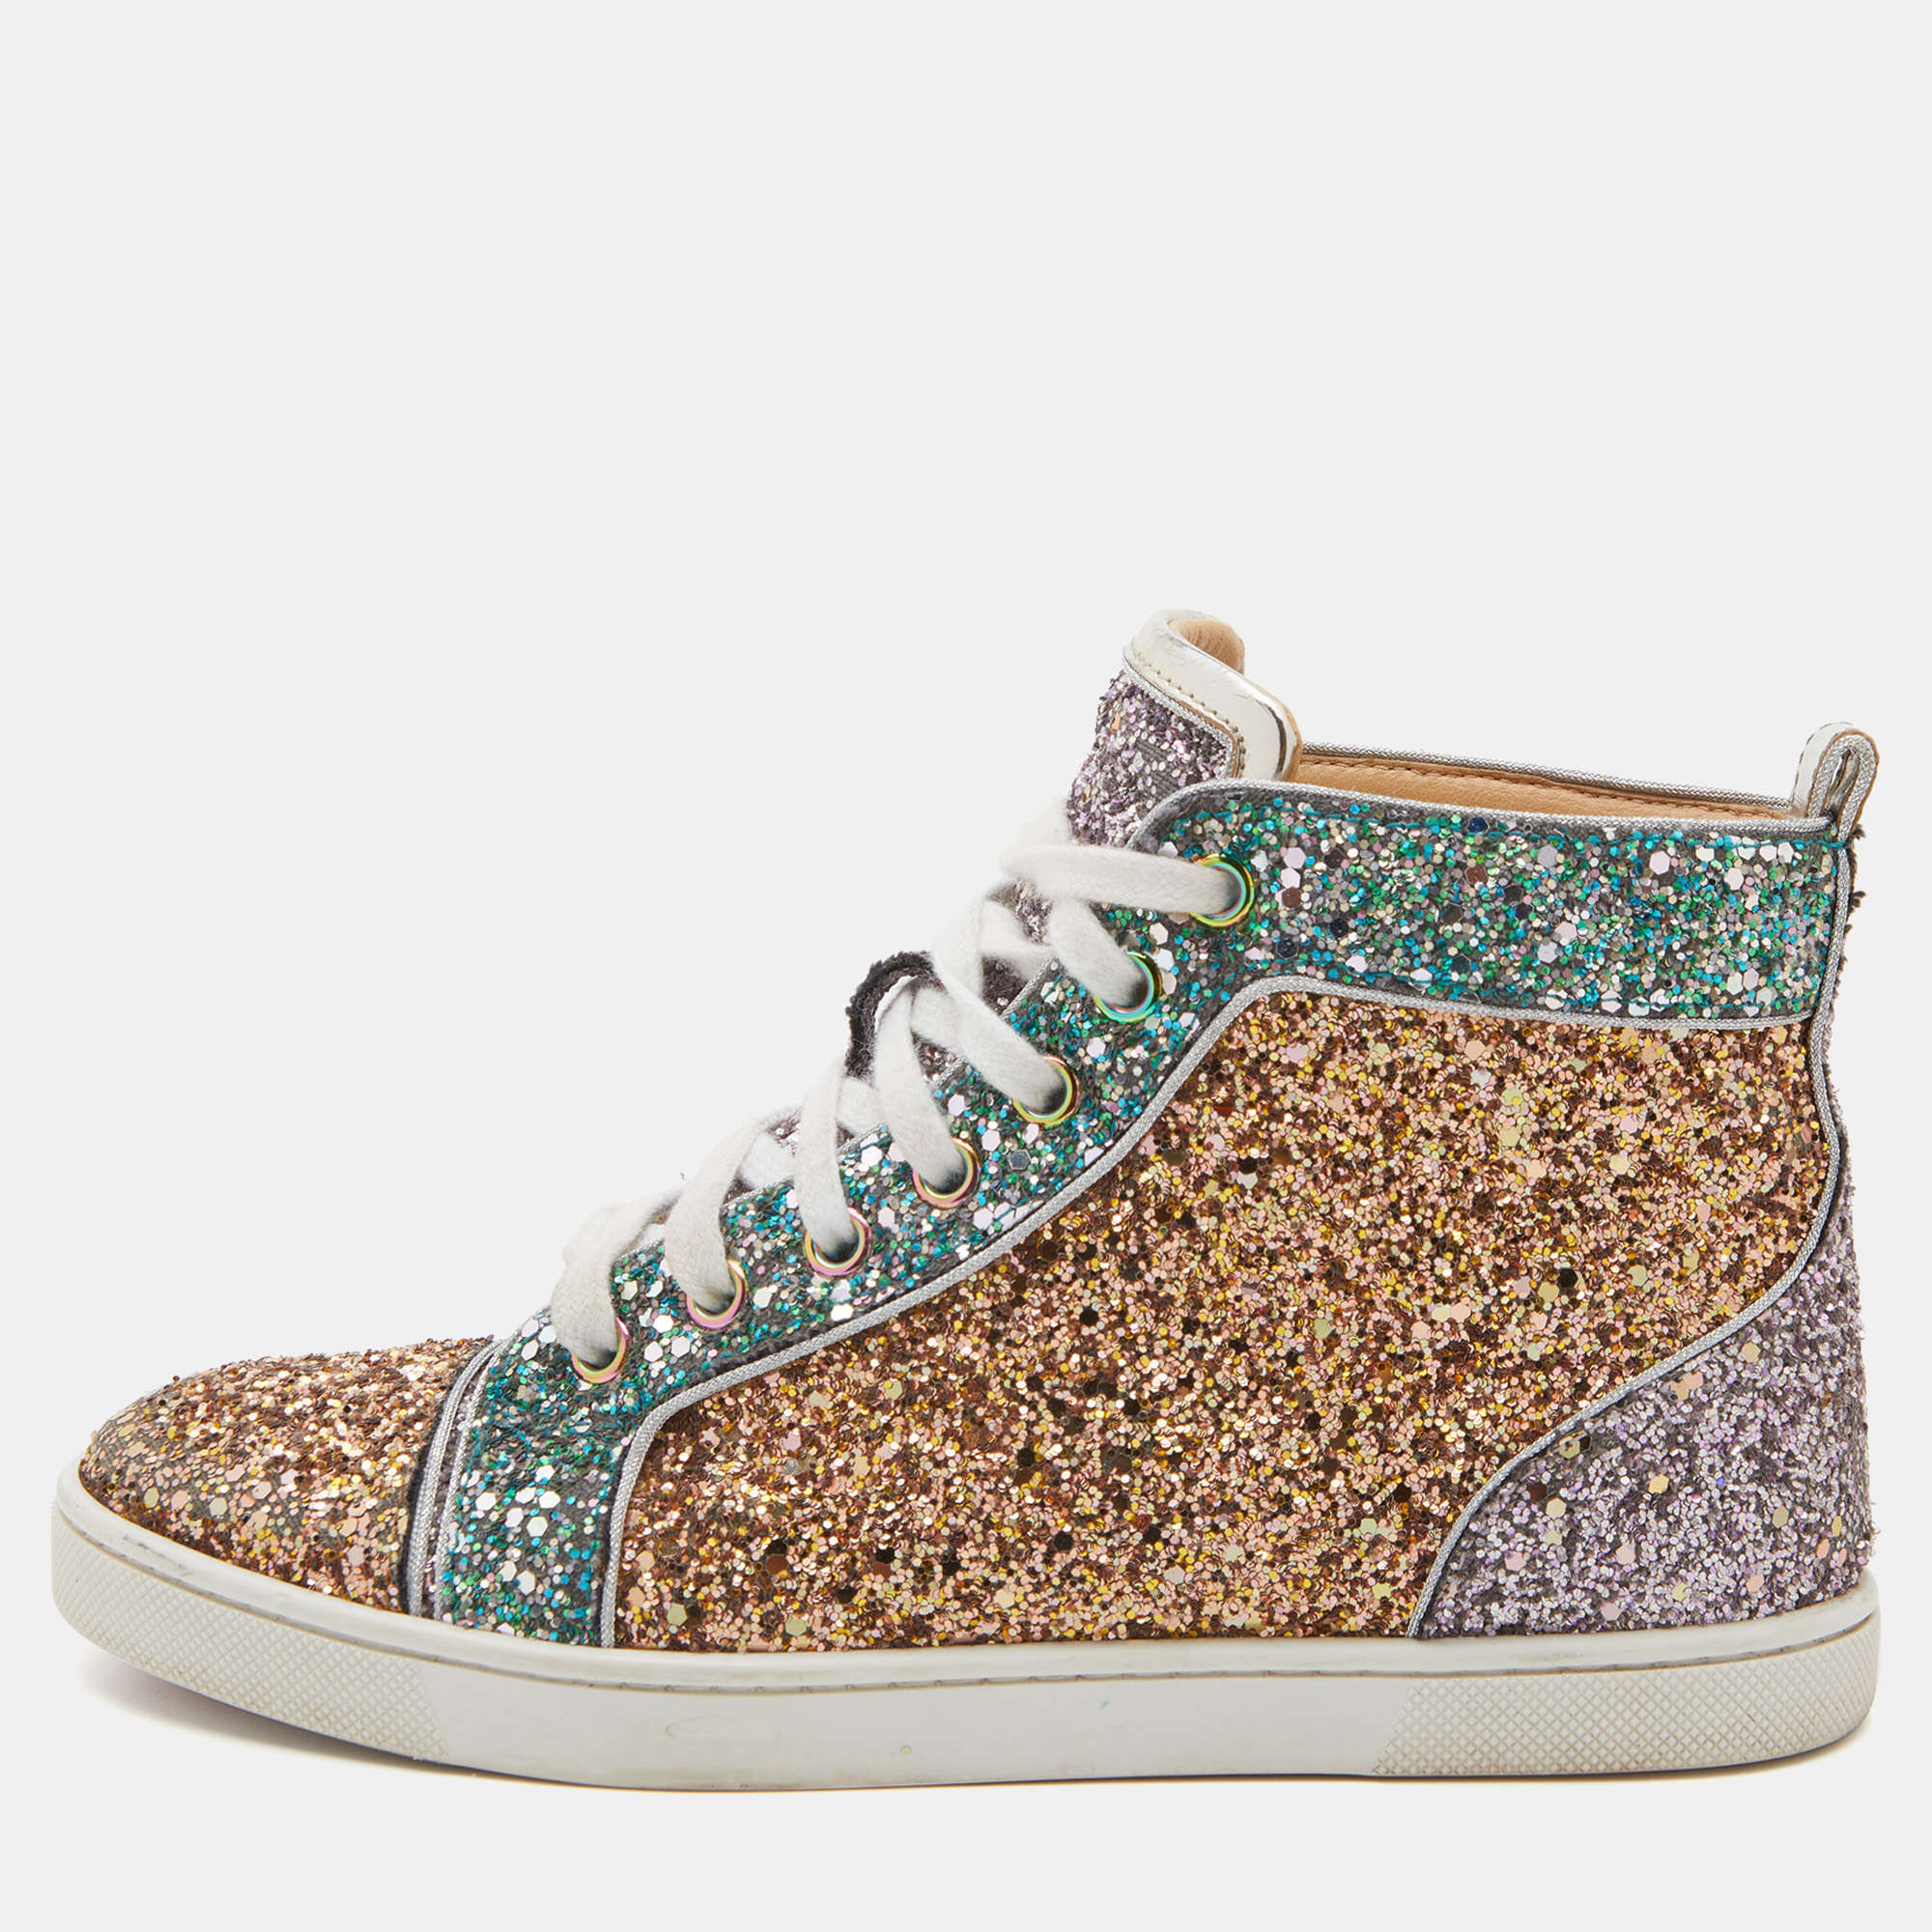 Pre-owned Christian Louboutin Multicolor Glitter Fabric Bip Bip High Top Sneakers Size 35.5